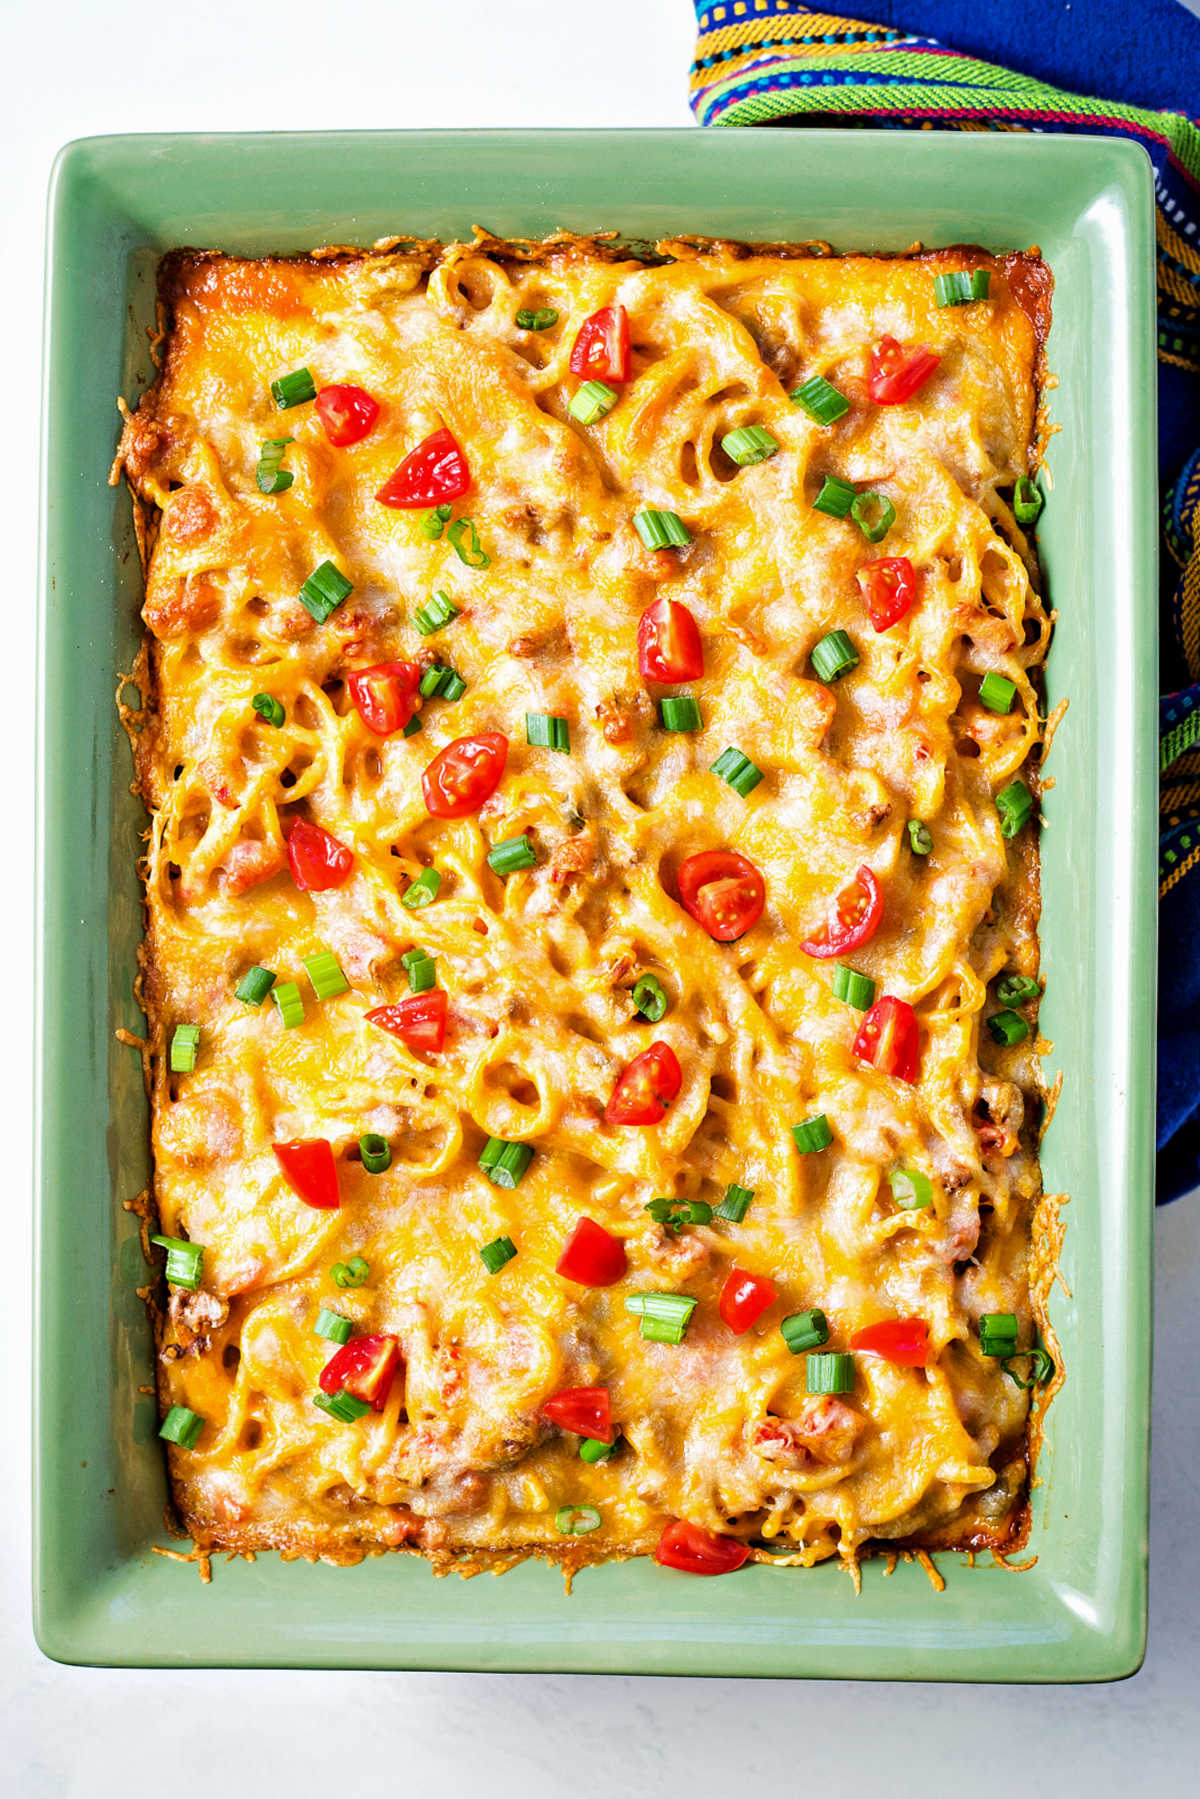 baked Mexican spaghetti in a casserole dish topped with sliced green onions and tomatoes.